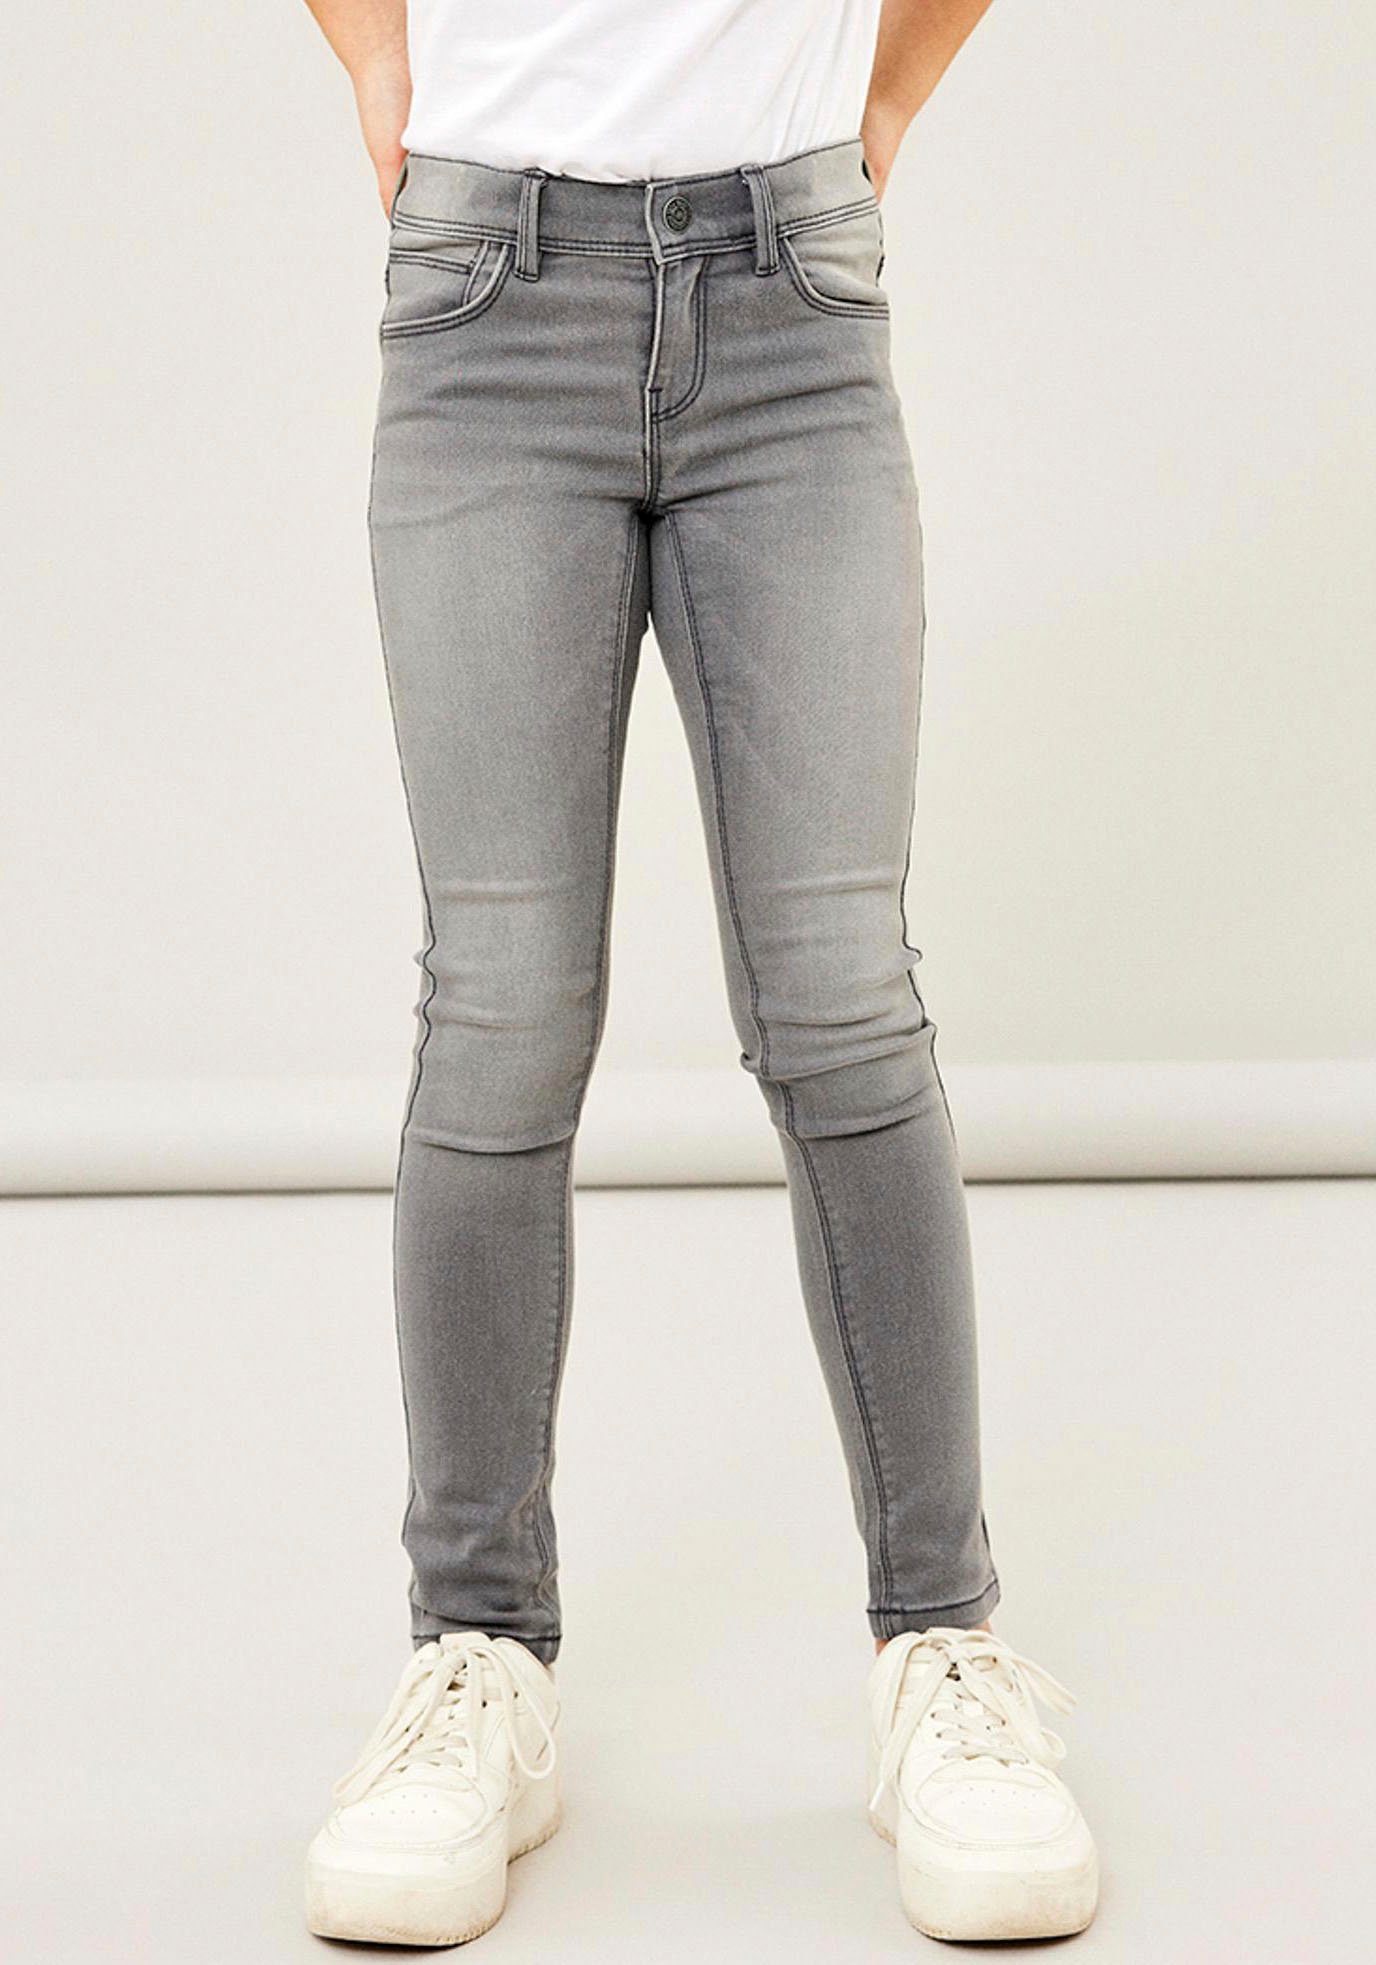 Name It Stretch-Jeans grey PANT denim DNMTAX NKFPOLLY light